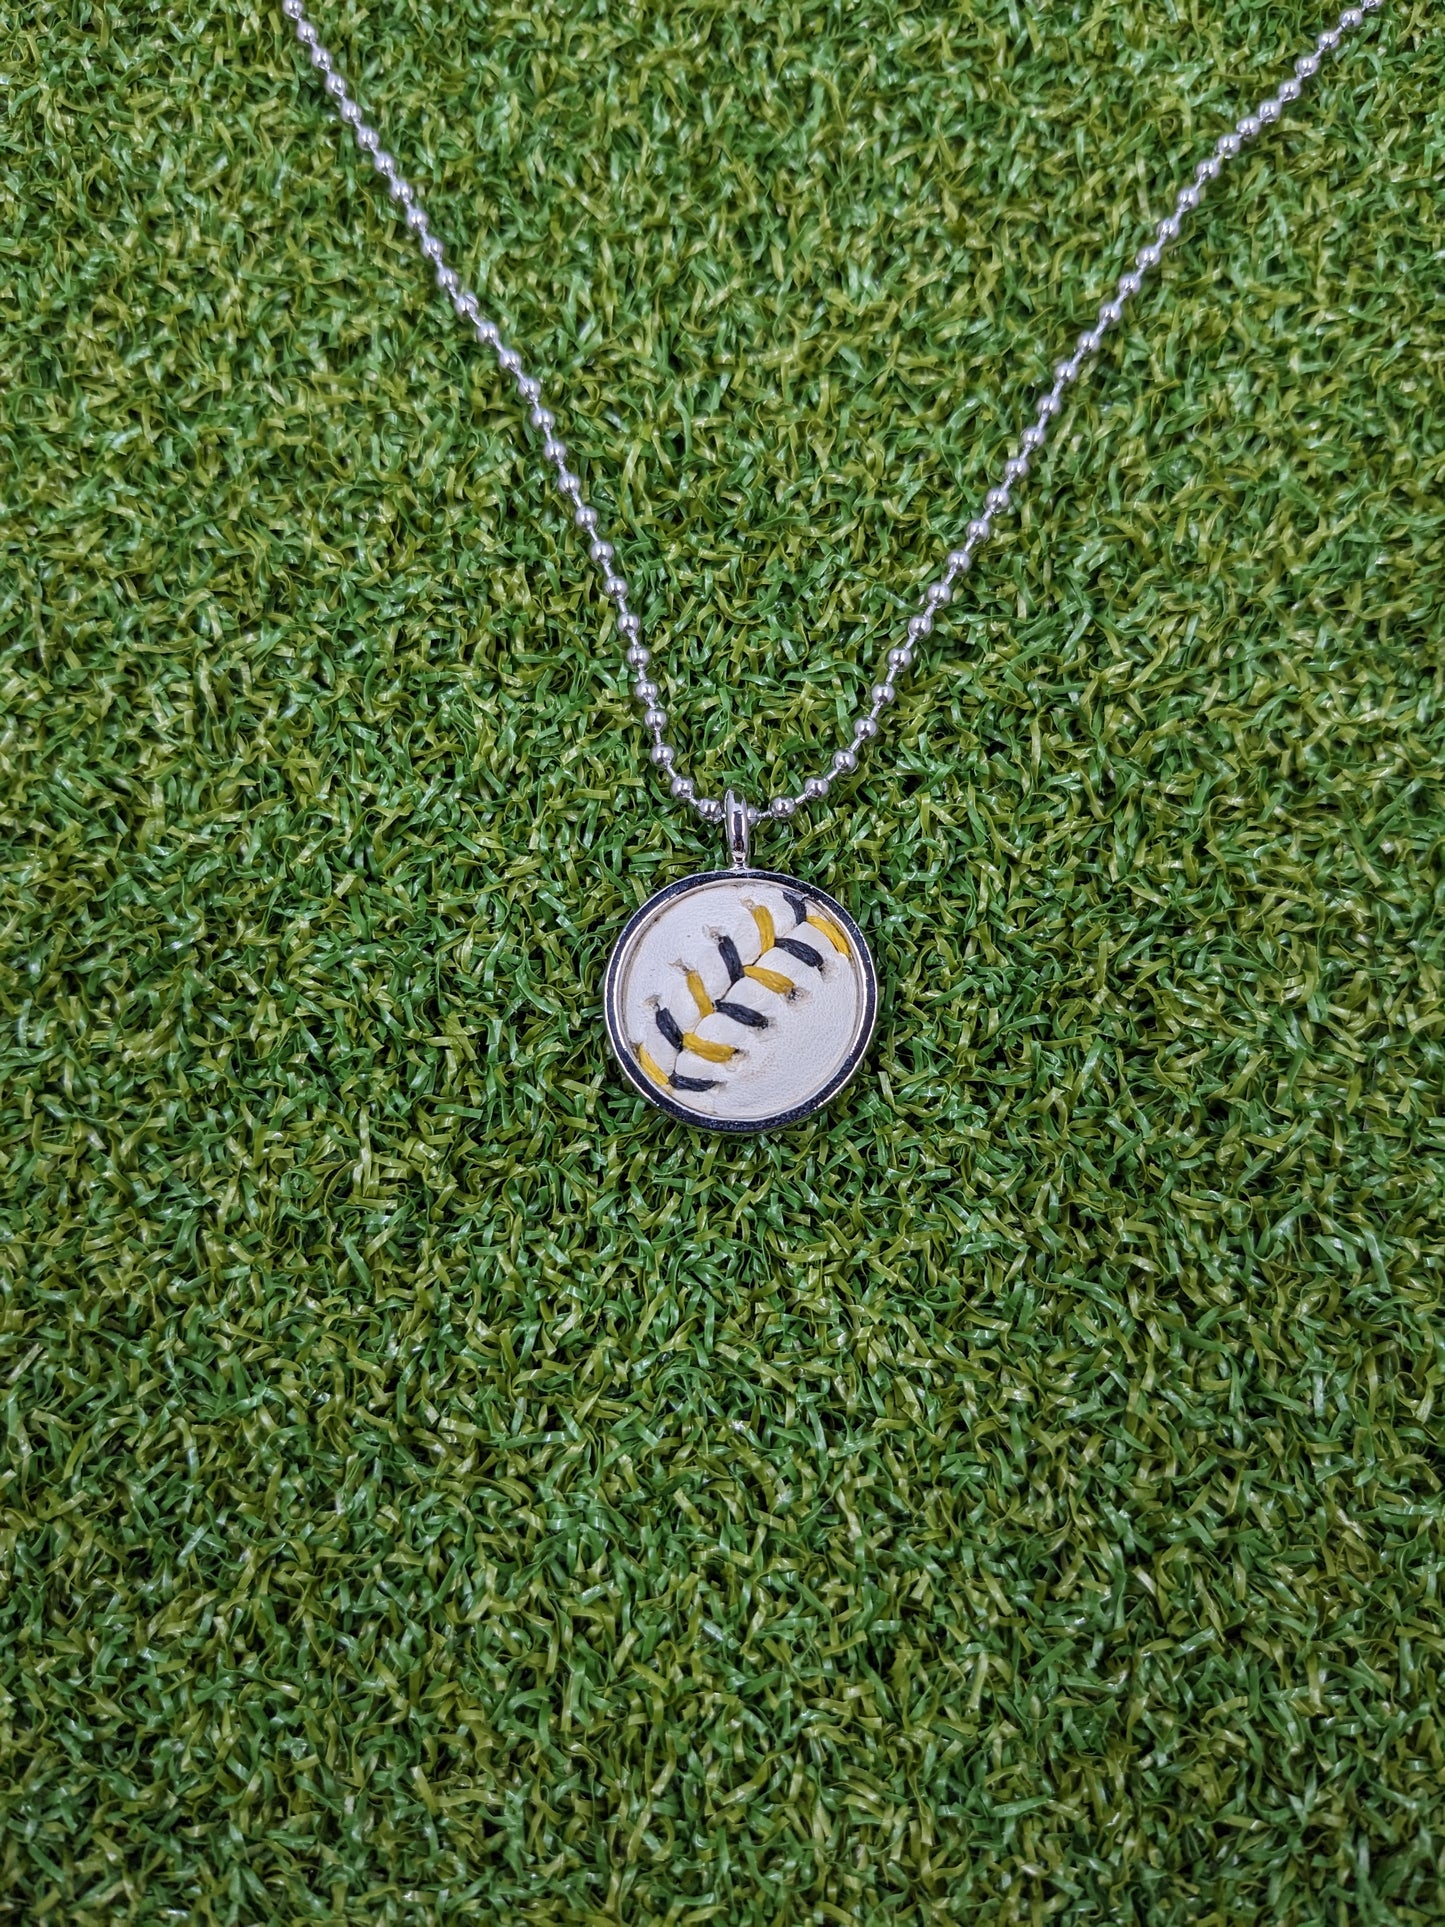 Black & Yellow Stitches - Baseball Necklace - Limited Edition